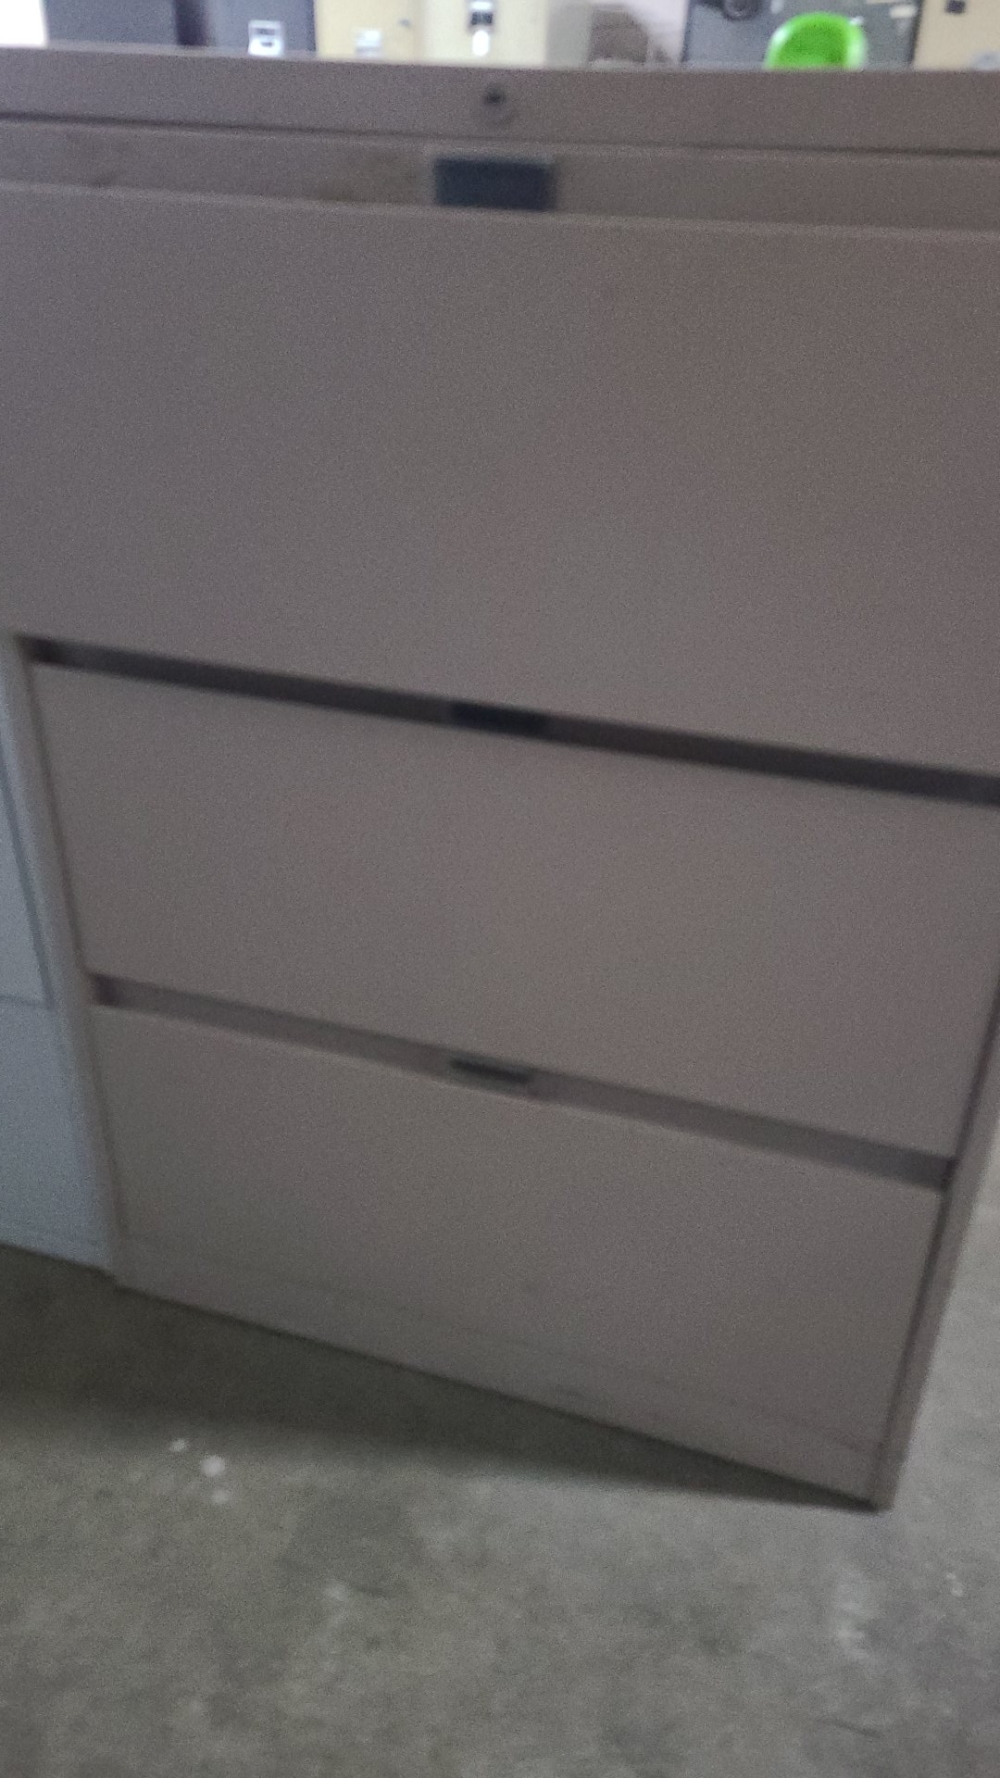  3 DRAWER LATERAL